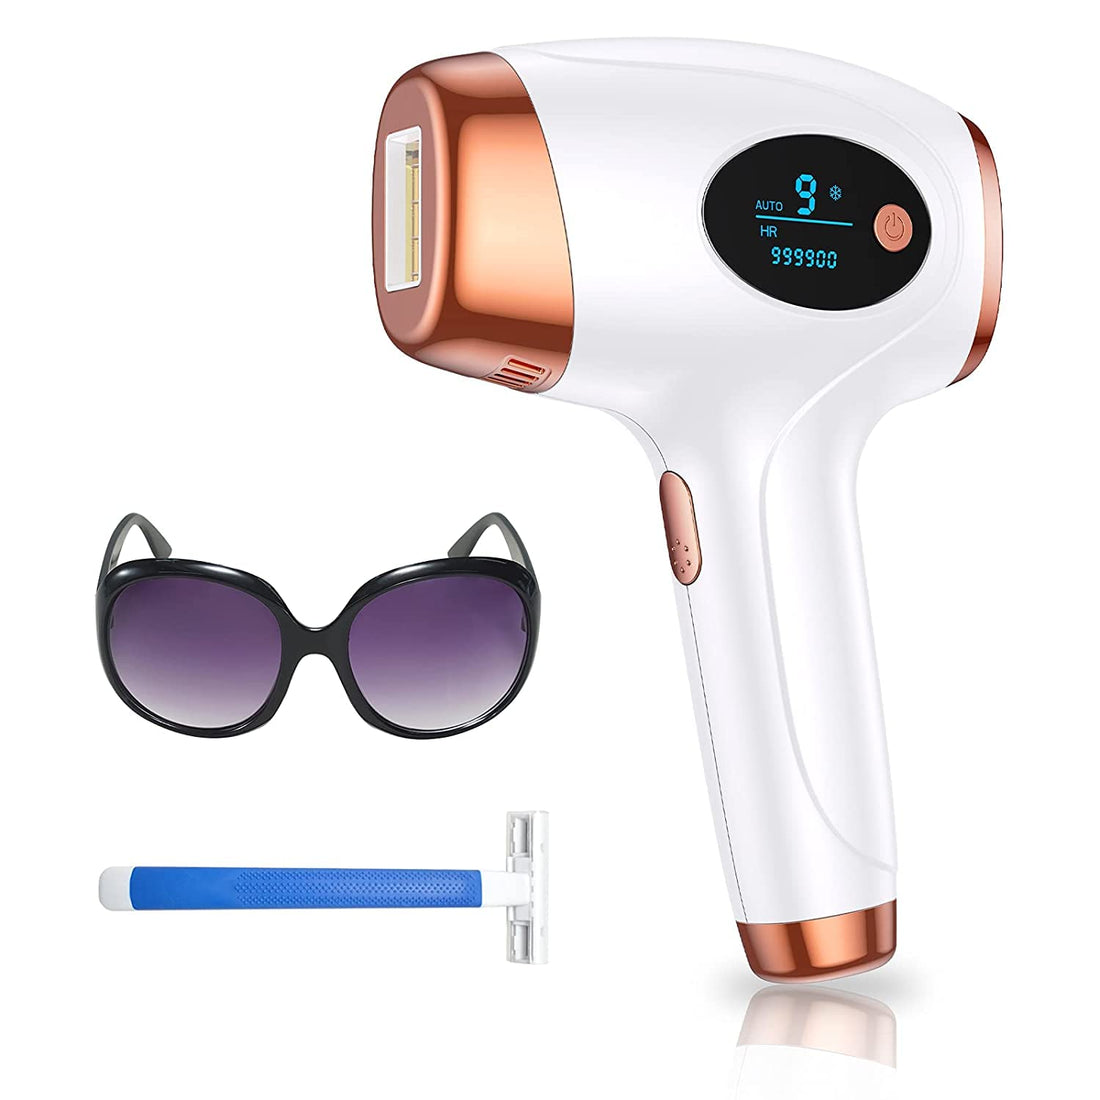 IPL Hair Removal, Laser Permanent Hair Removal for Women and Men, 999900 Flashes UPGRADED At-Home Hair Removal Device for Facial Legs Arms Whole Body Treatment